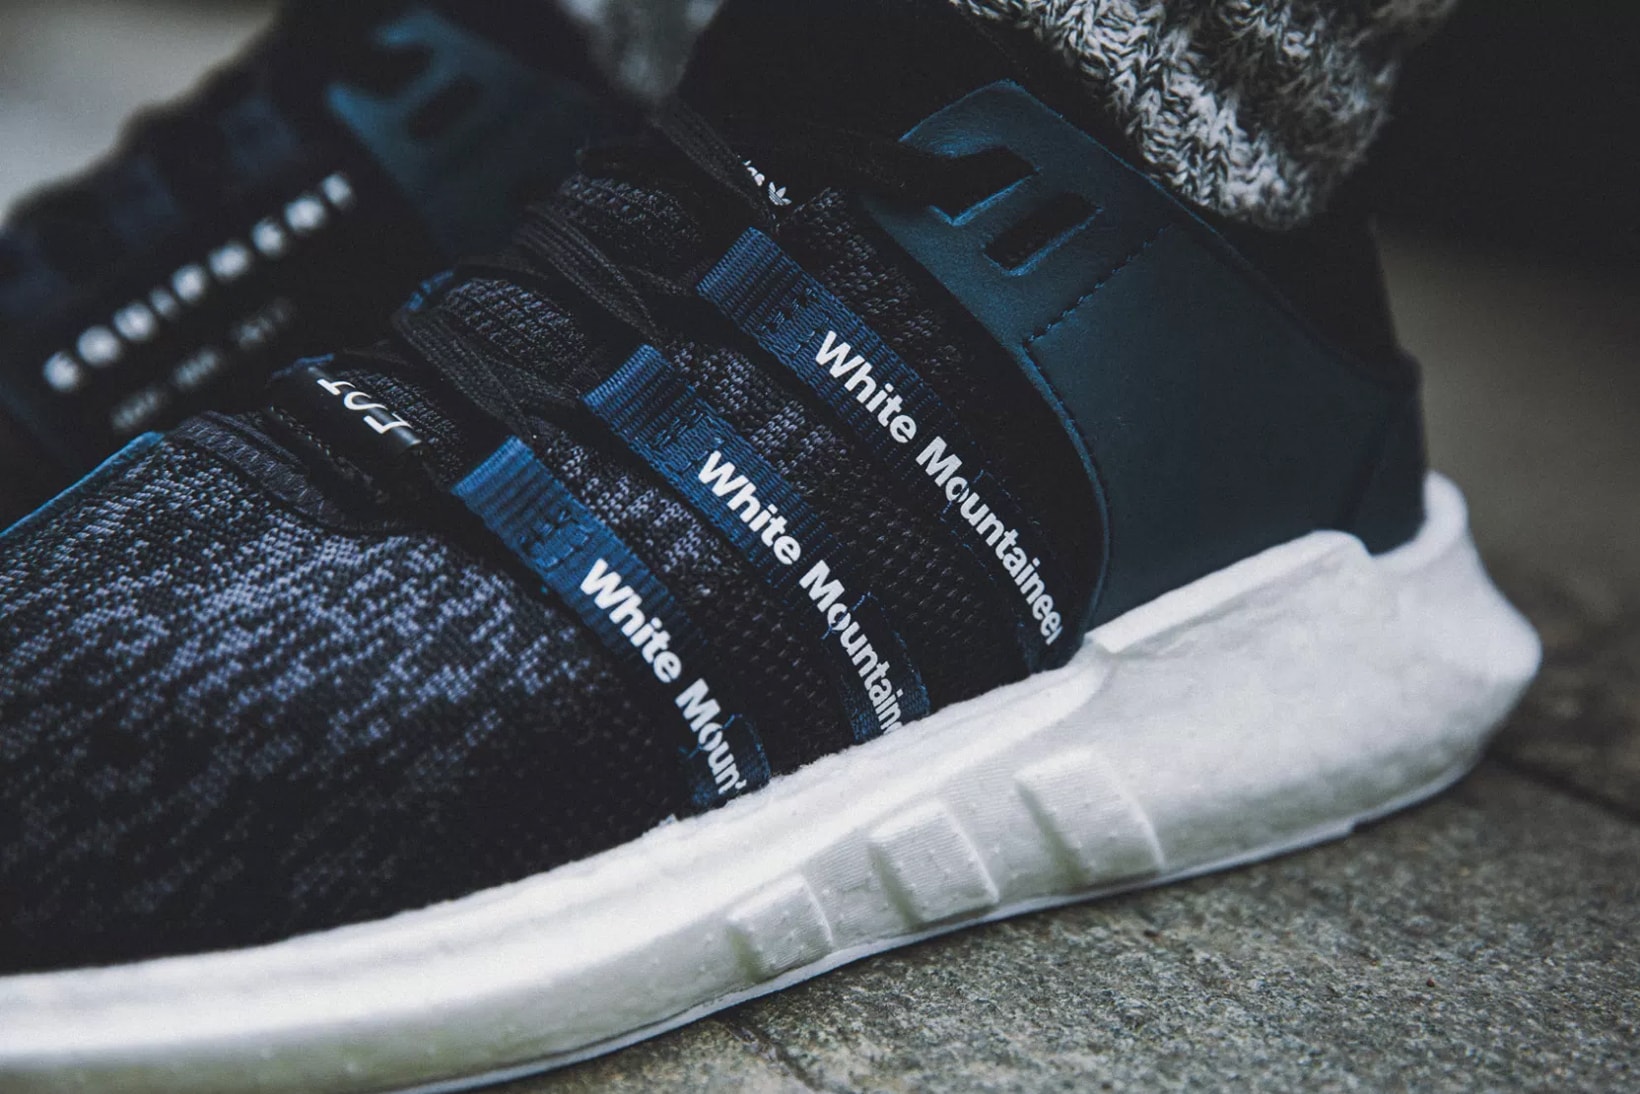 White Mountaineering adidas Originals Footwear Collection